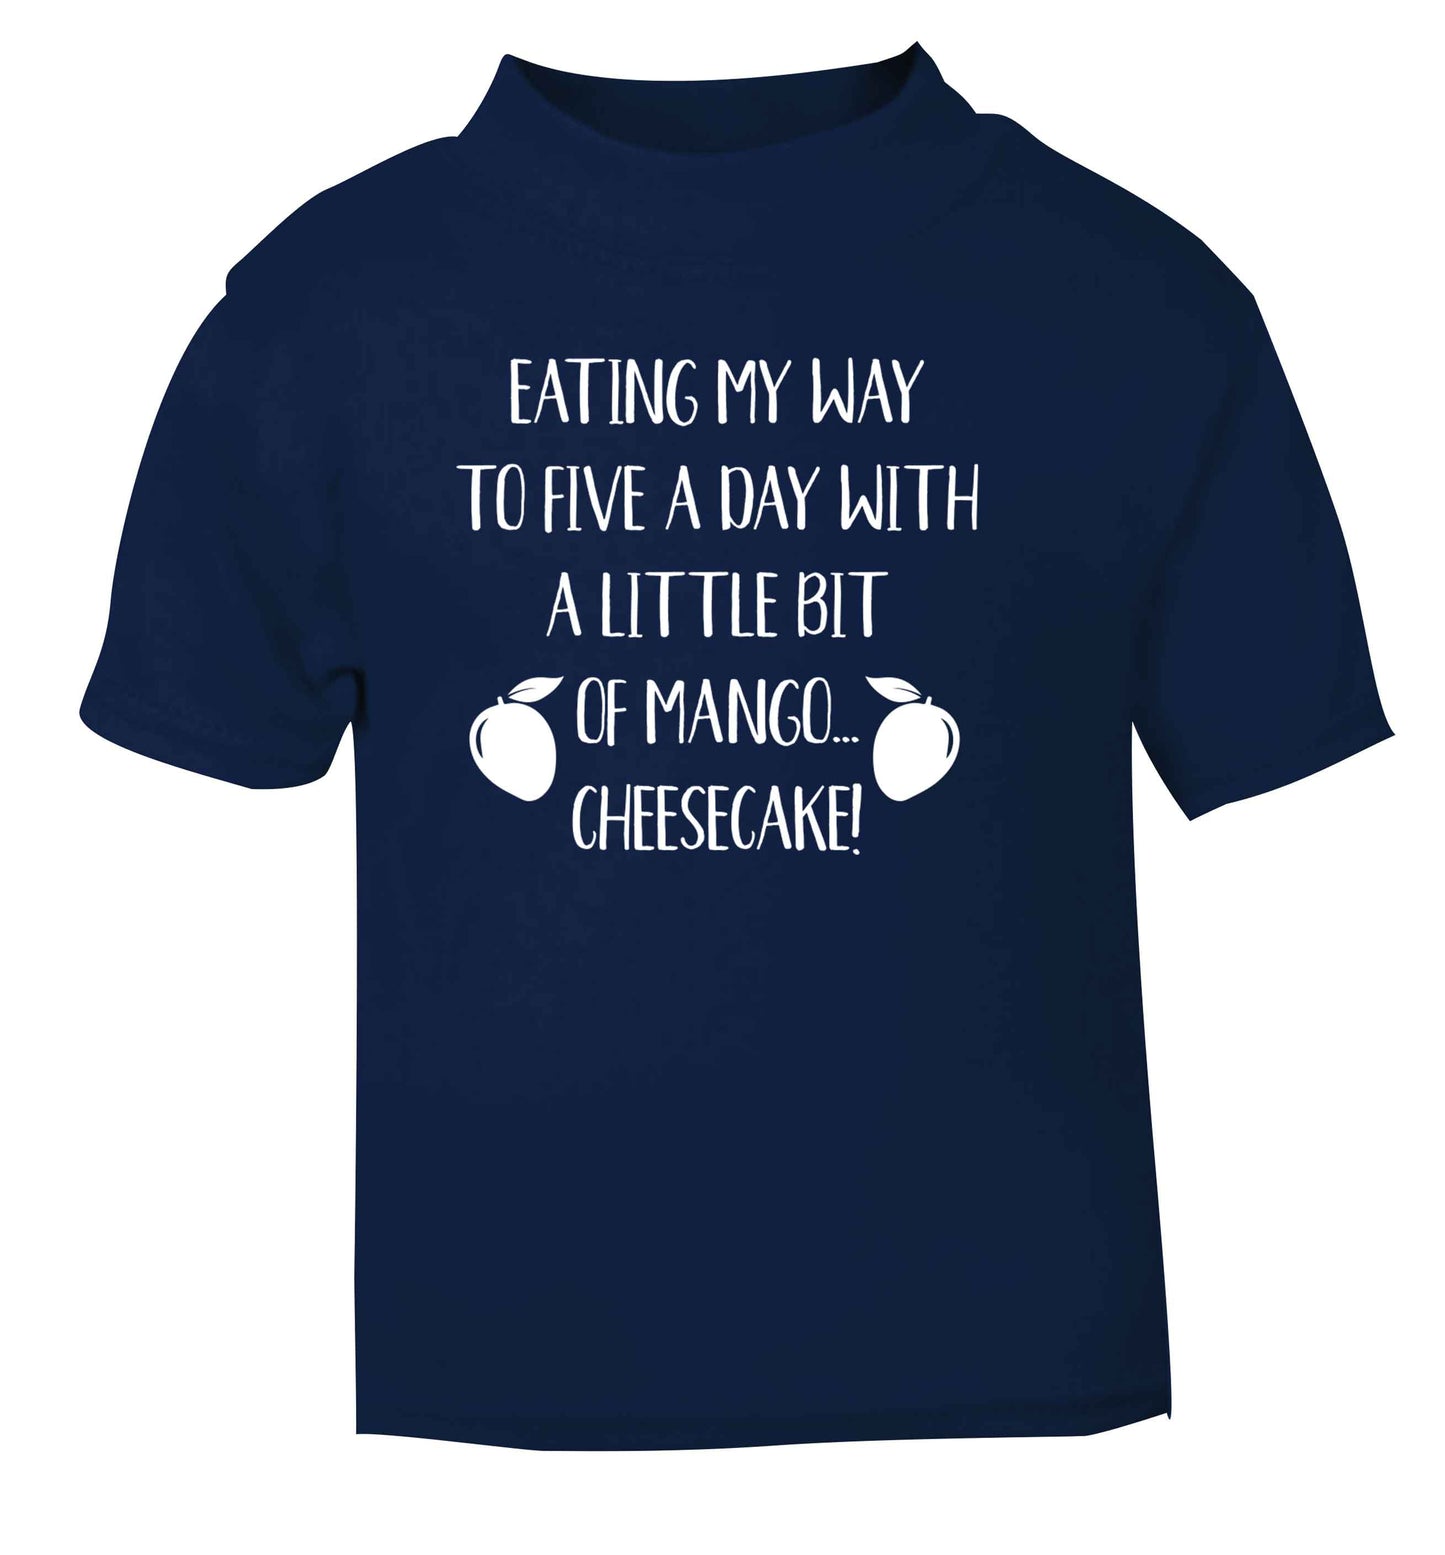 Eating my way to five a day with a little bit of mango cheesecake navy Baby Toddler Tshirt 2 Years